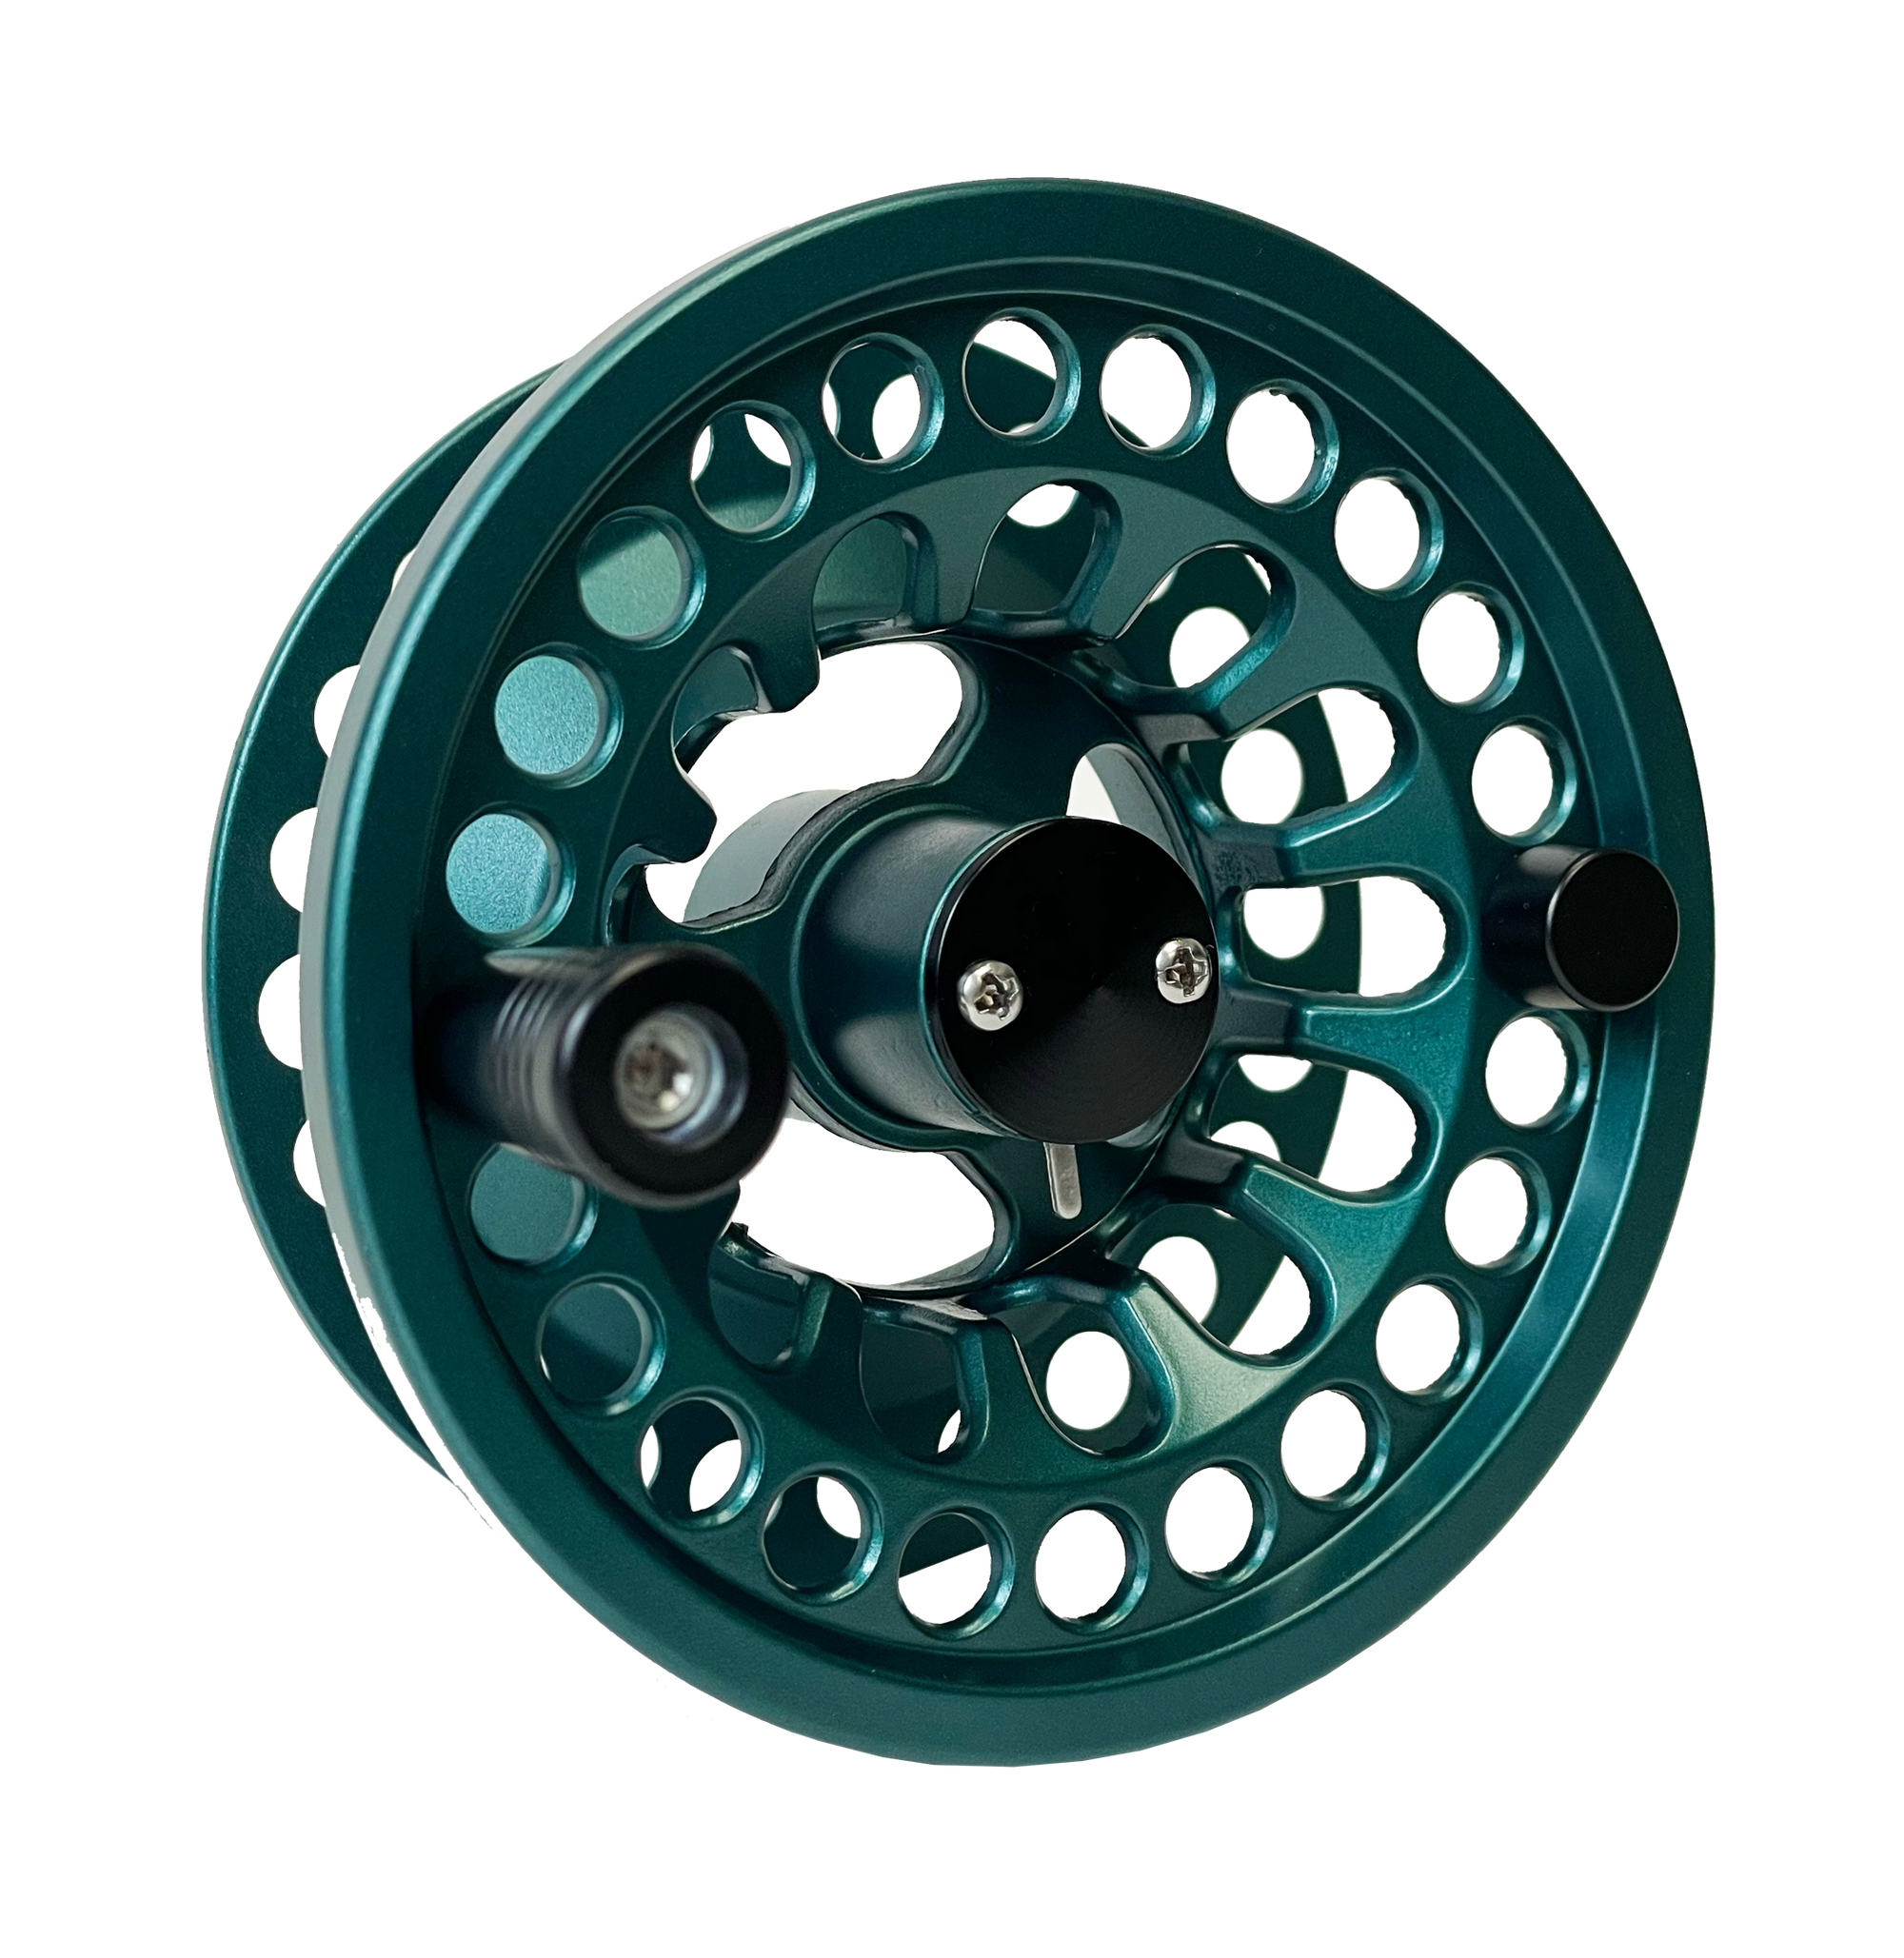 Cheeky Limitless Fly Reel - The Fly Shack Fly Fishing